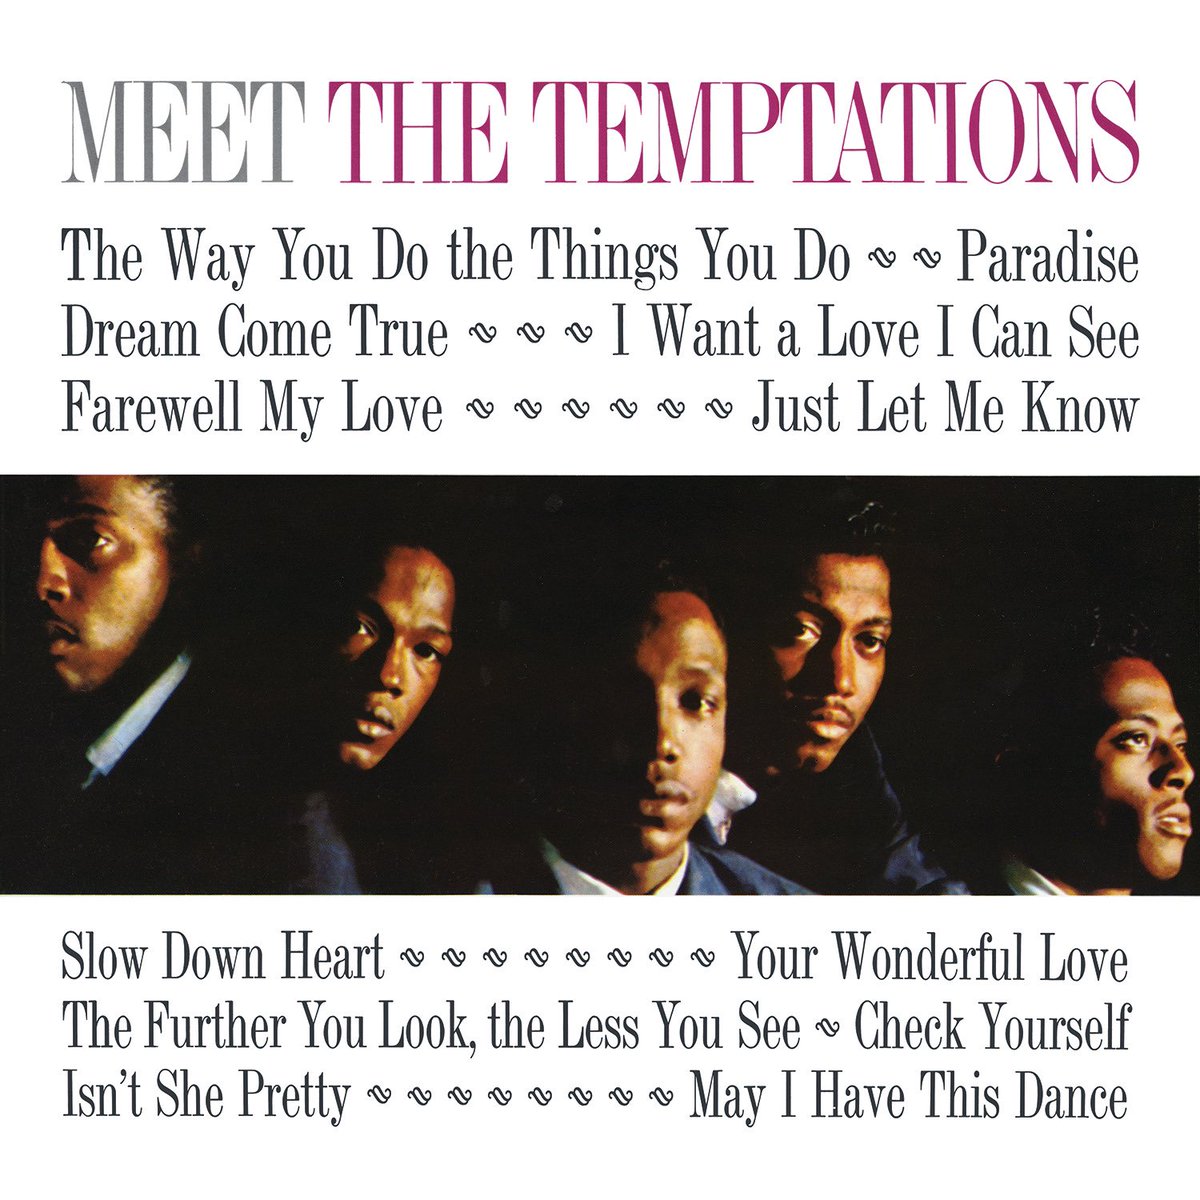 60 years ago today, The Temptations released the album that started it all! ‘Meet The Temptations’ encompassed their early singles and included their soon-to-be iconic “The Way You Do the Things You Do,” which featured the lineup of Eddie, Melvin, Paul, Otis, and David.